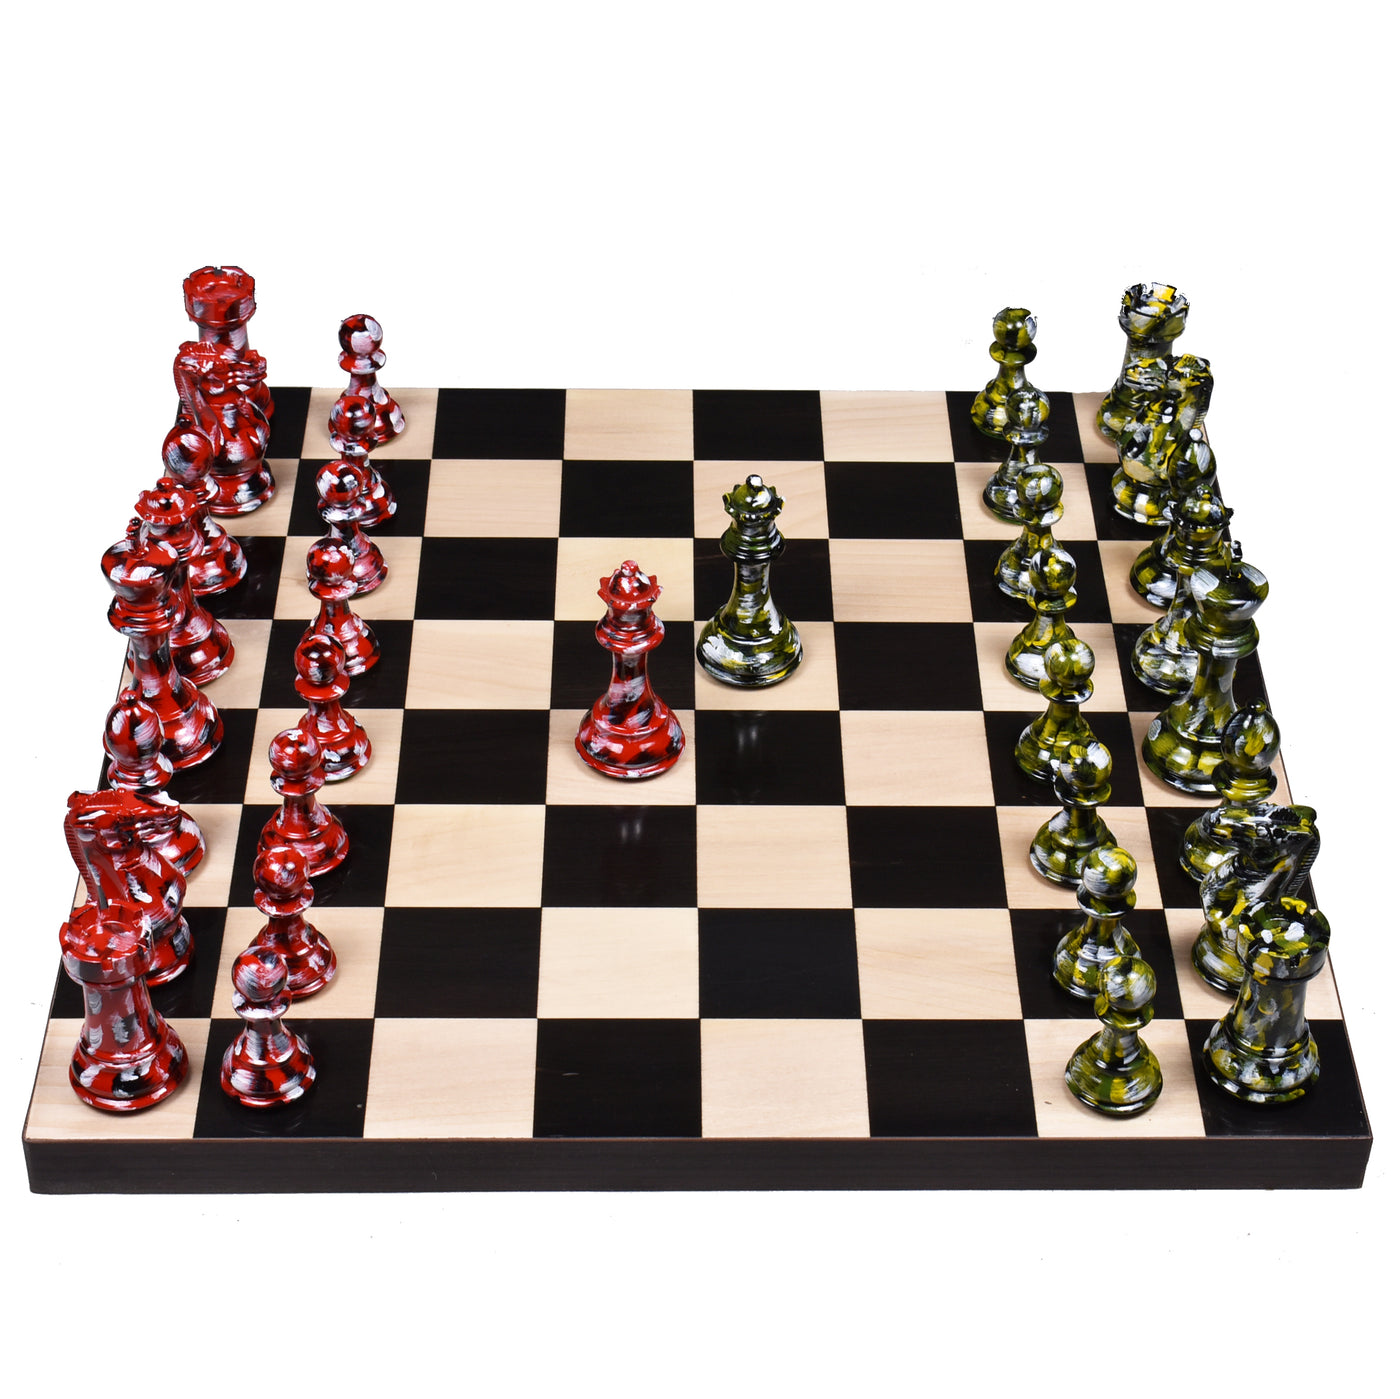 Dance of Colours Series Staunton Chess Pieces only set 